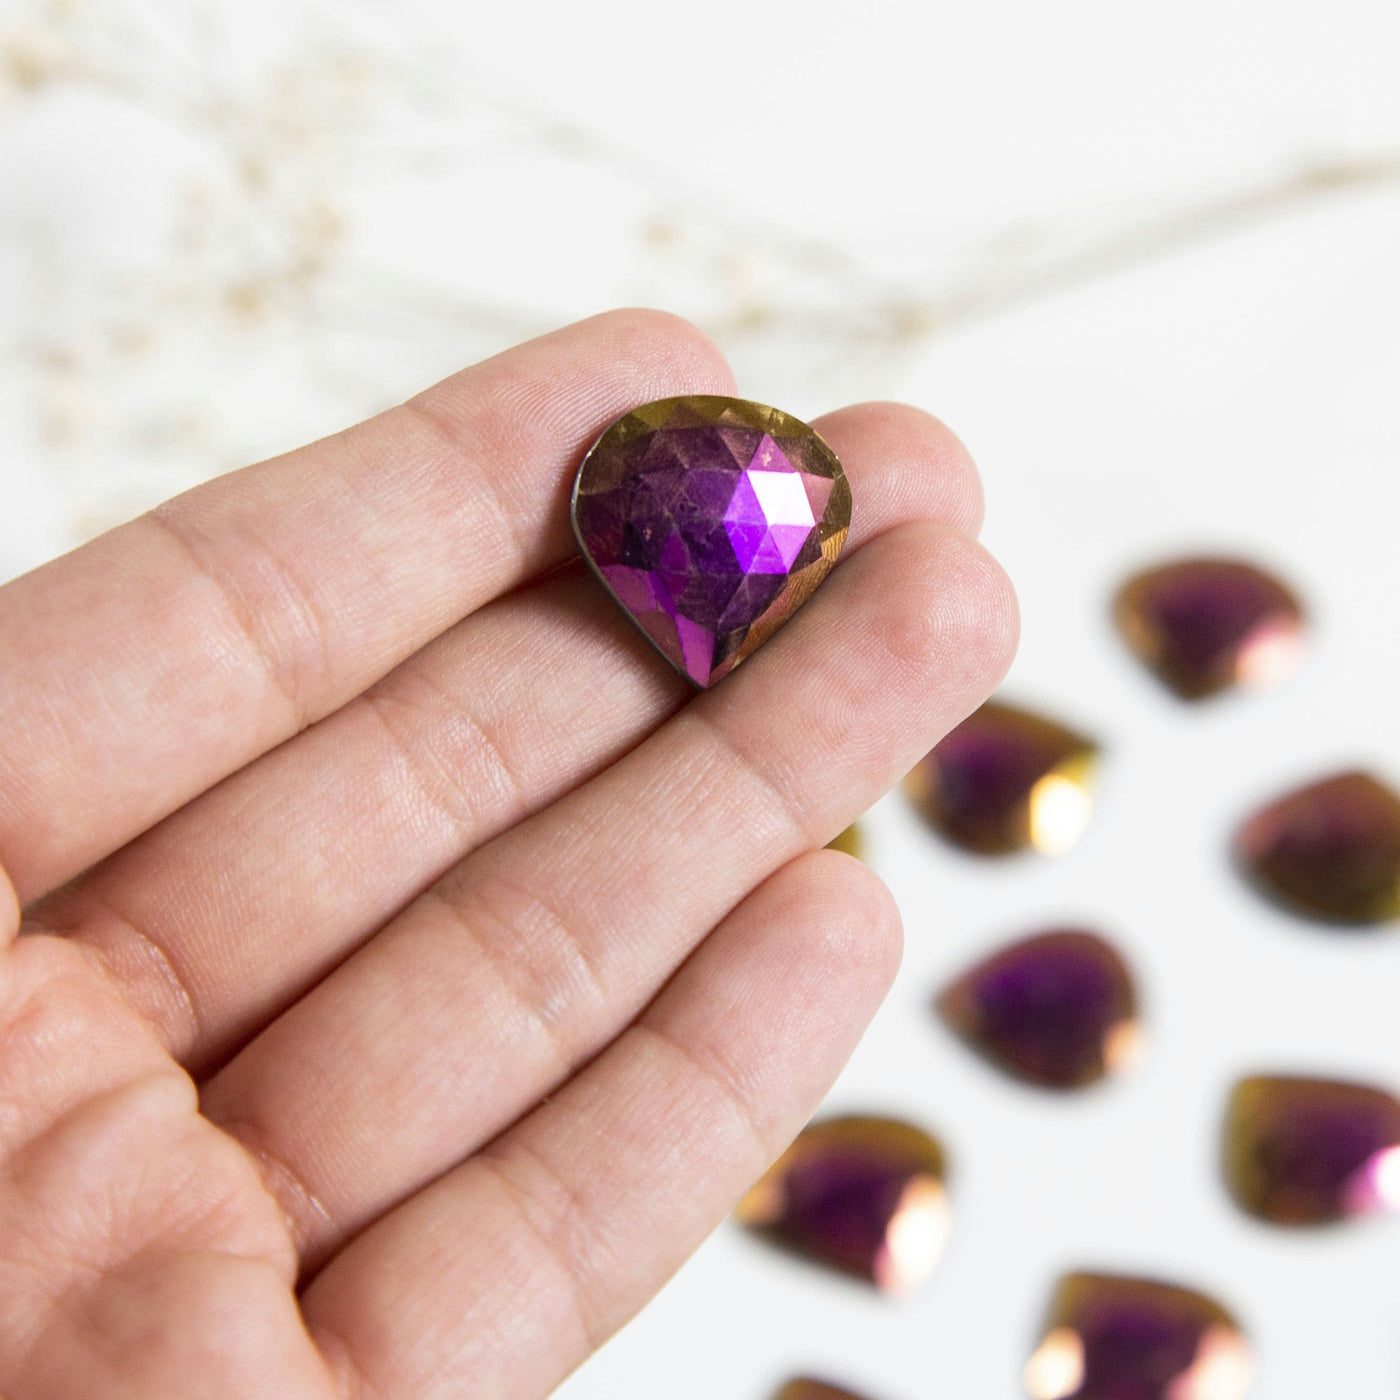 hand holding up Titanium Teardrop Shaped Cabochon with others blurred in background